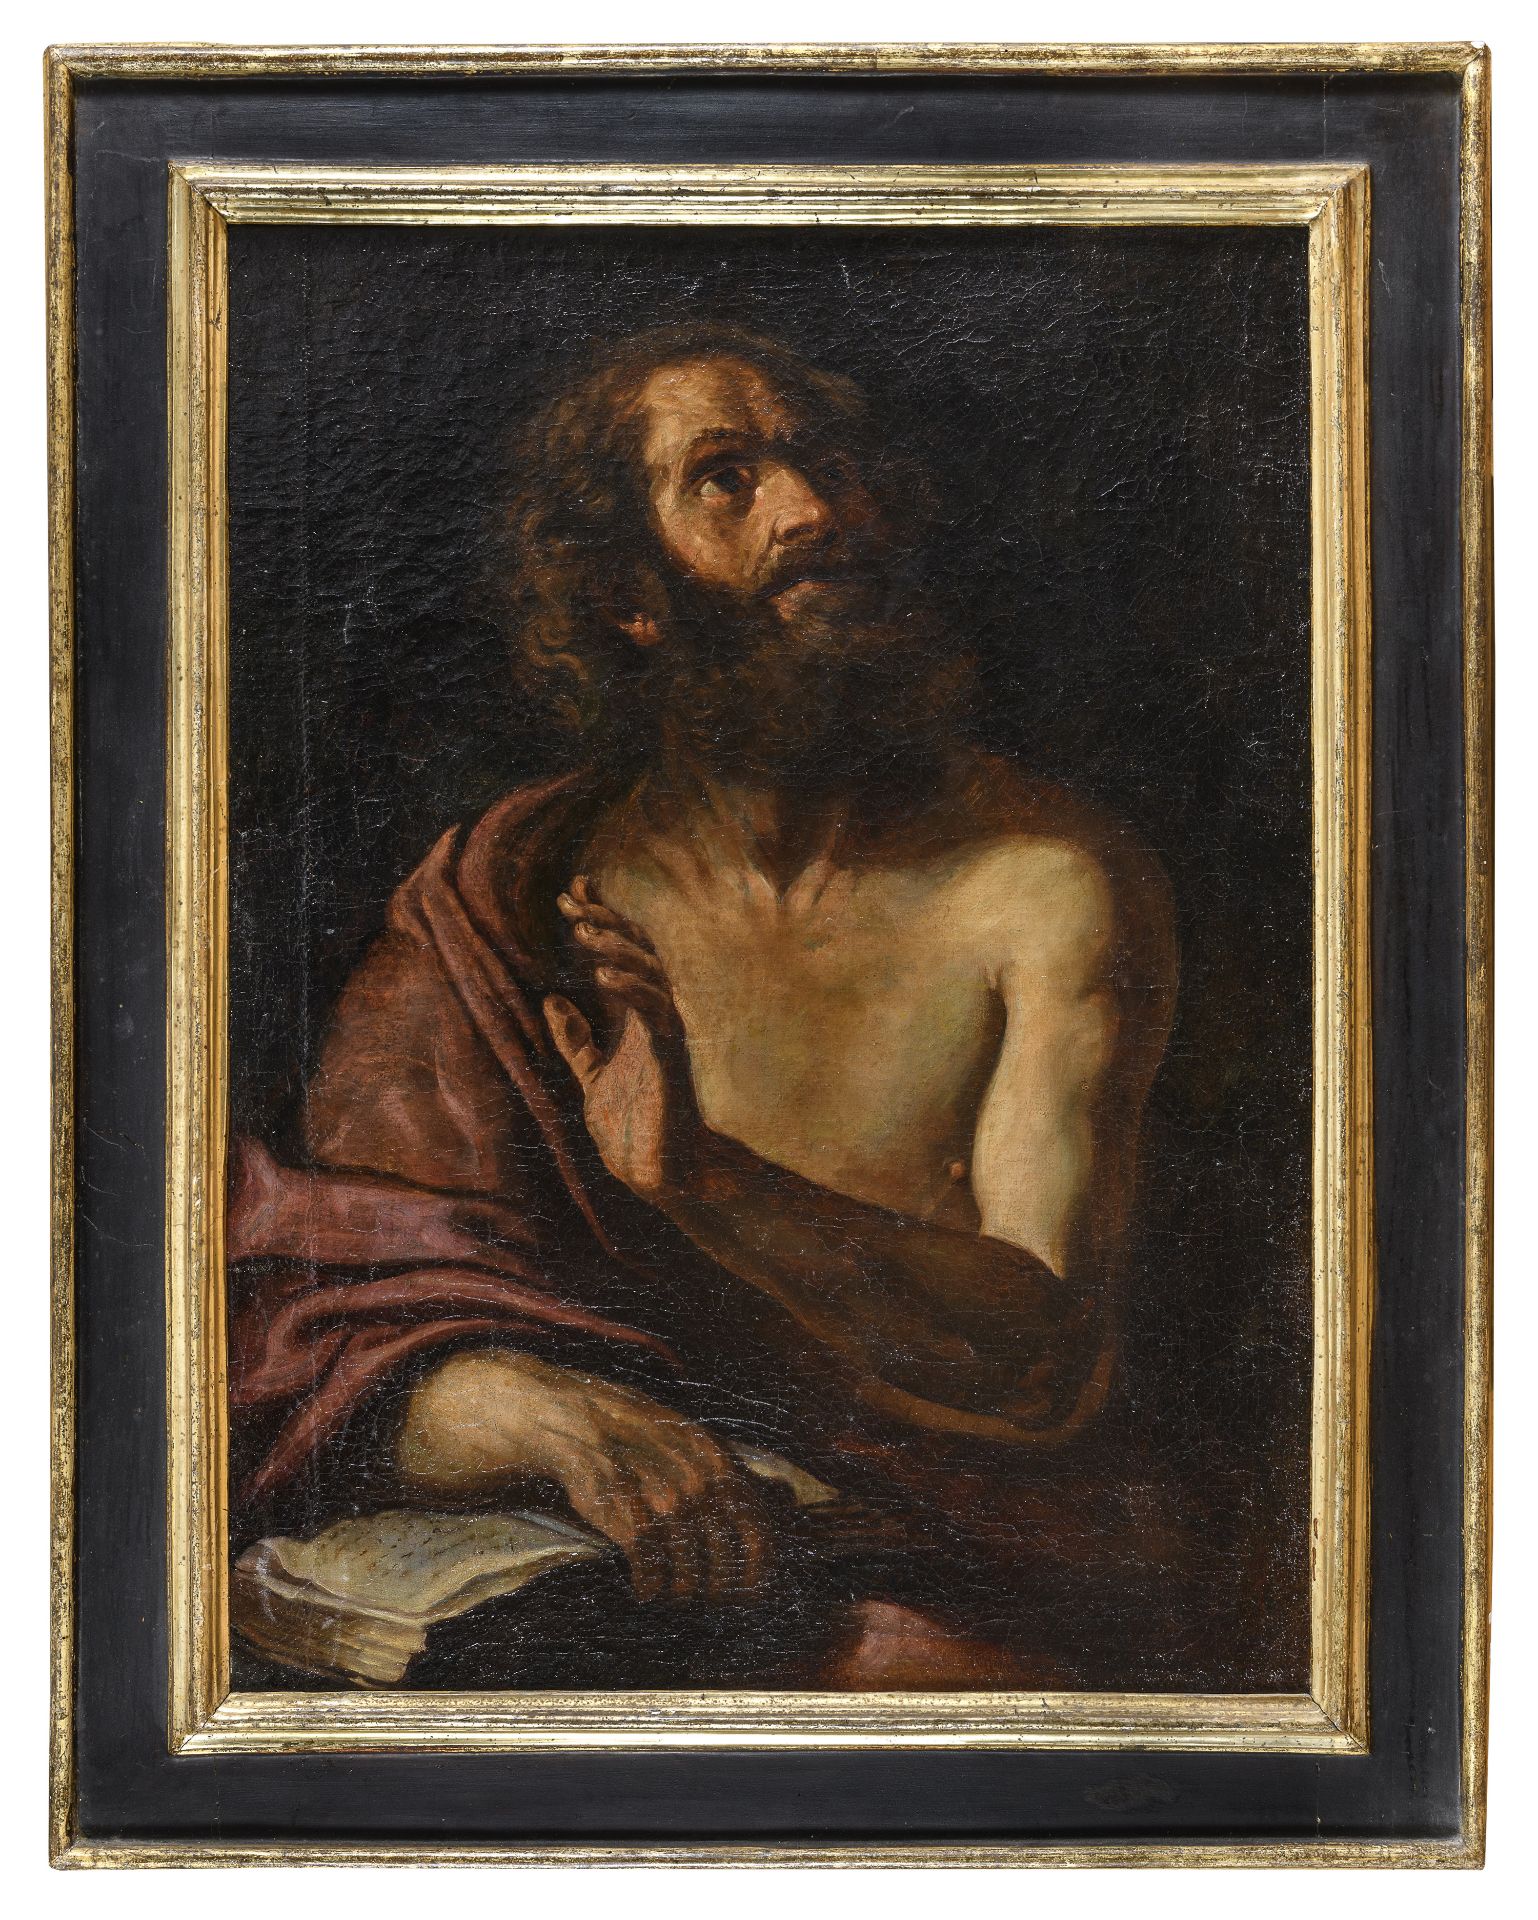 OIL PAINTING BY FOLLOWER OF GIOVANNI FRANCESCO BARBIERI known as GUERCINO